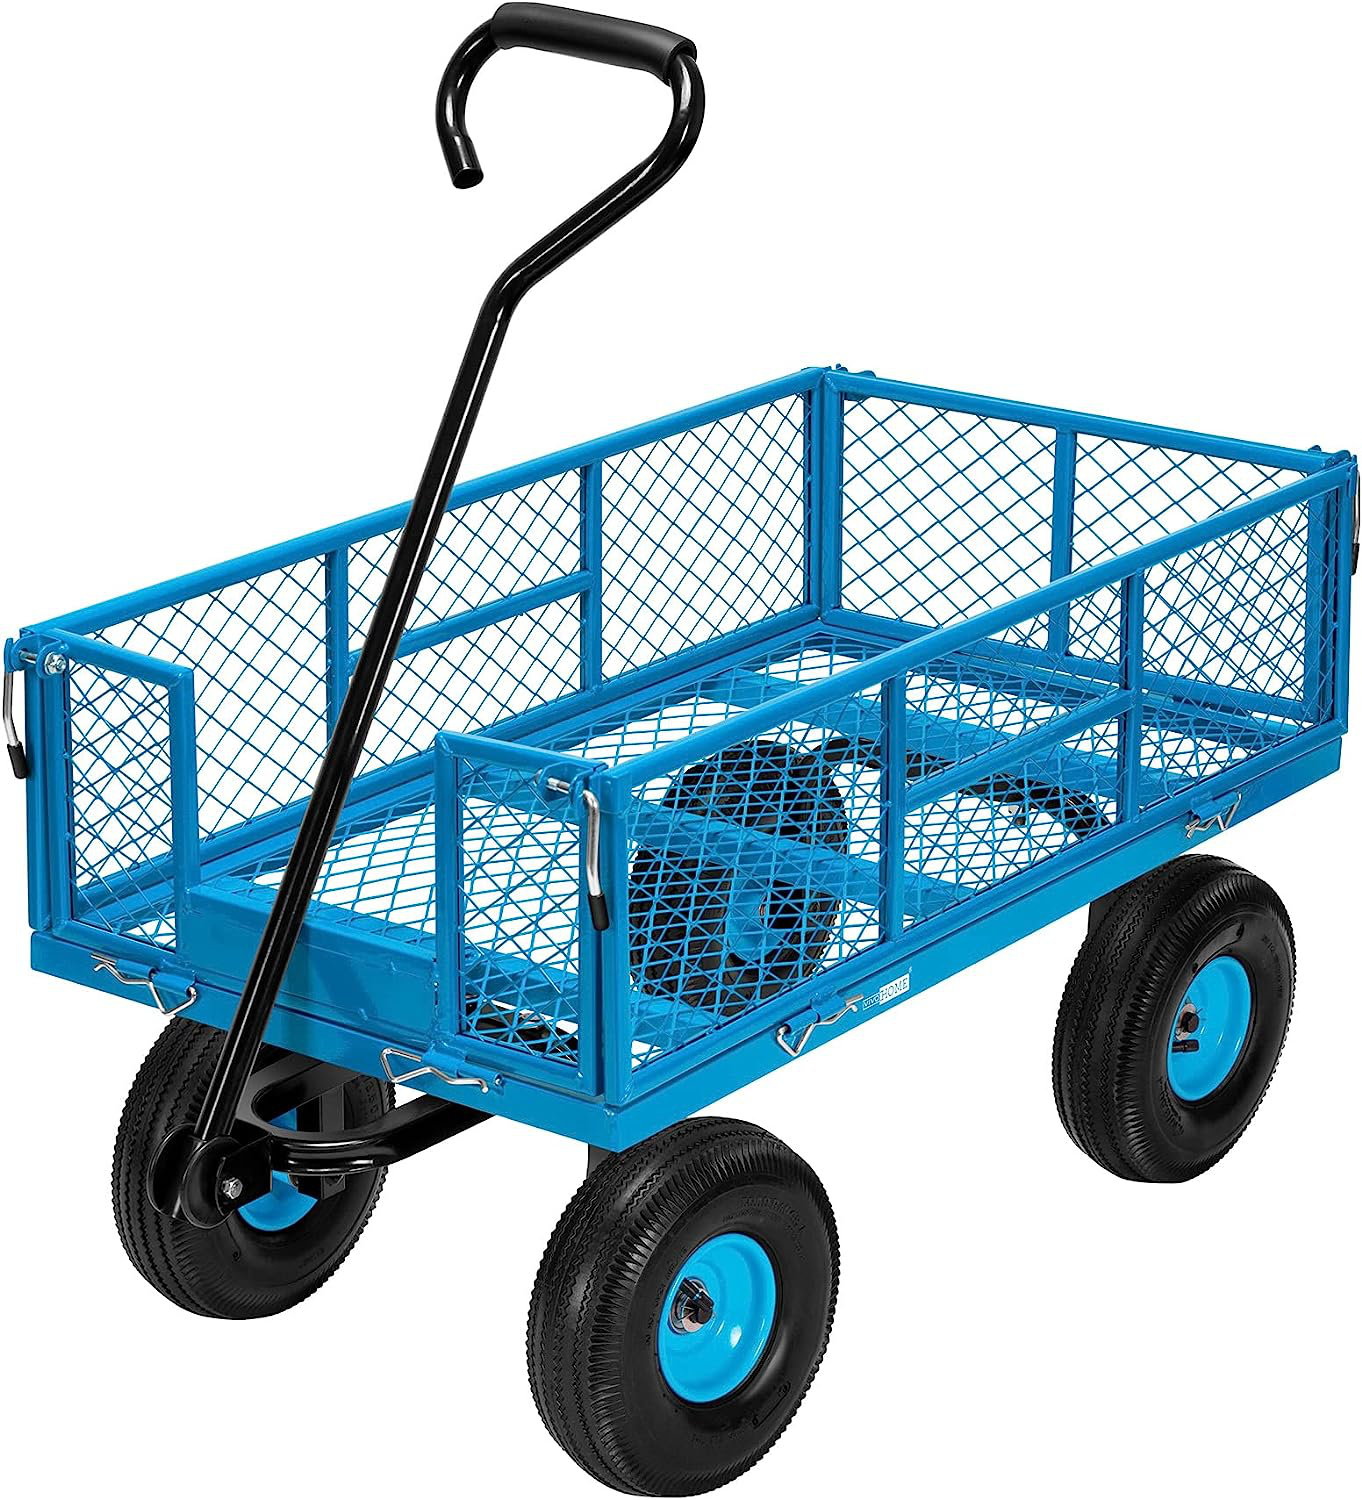 Gorilla Carts GOR1400-COM Heavy-Duty Steel Utility Cart with Removable Sides and